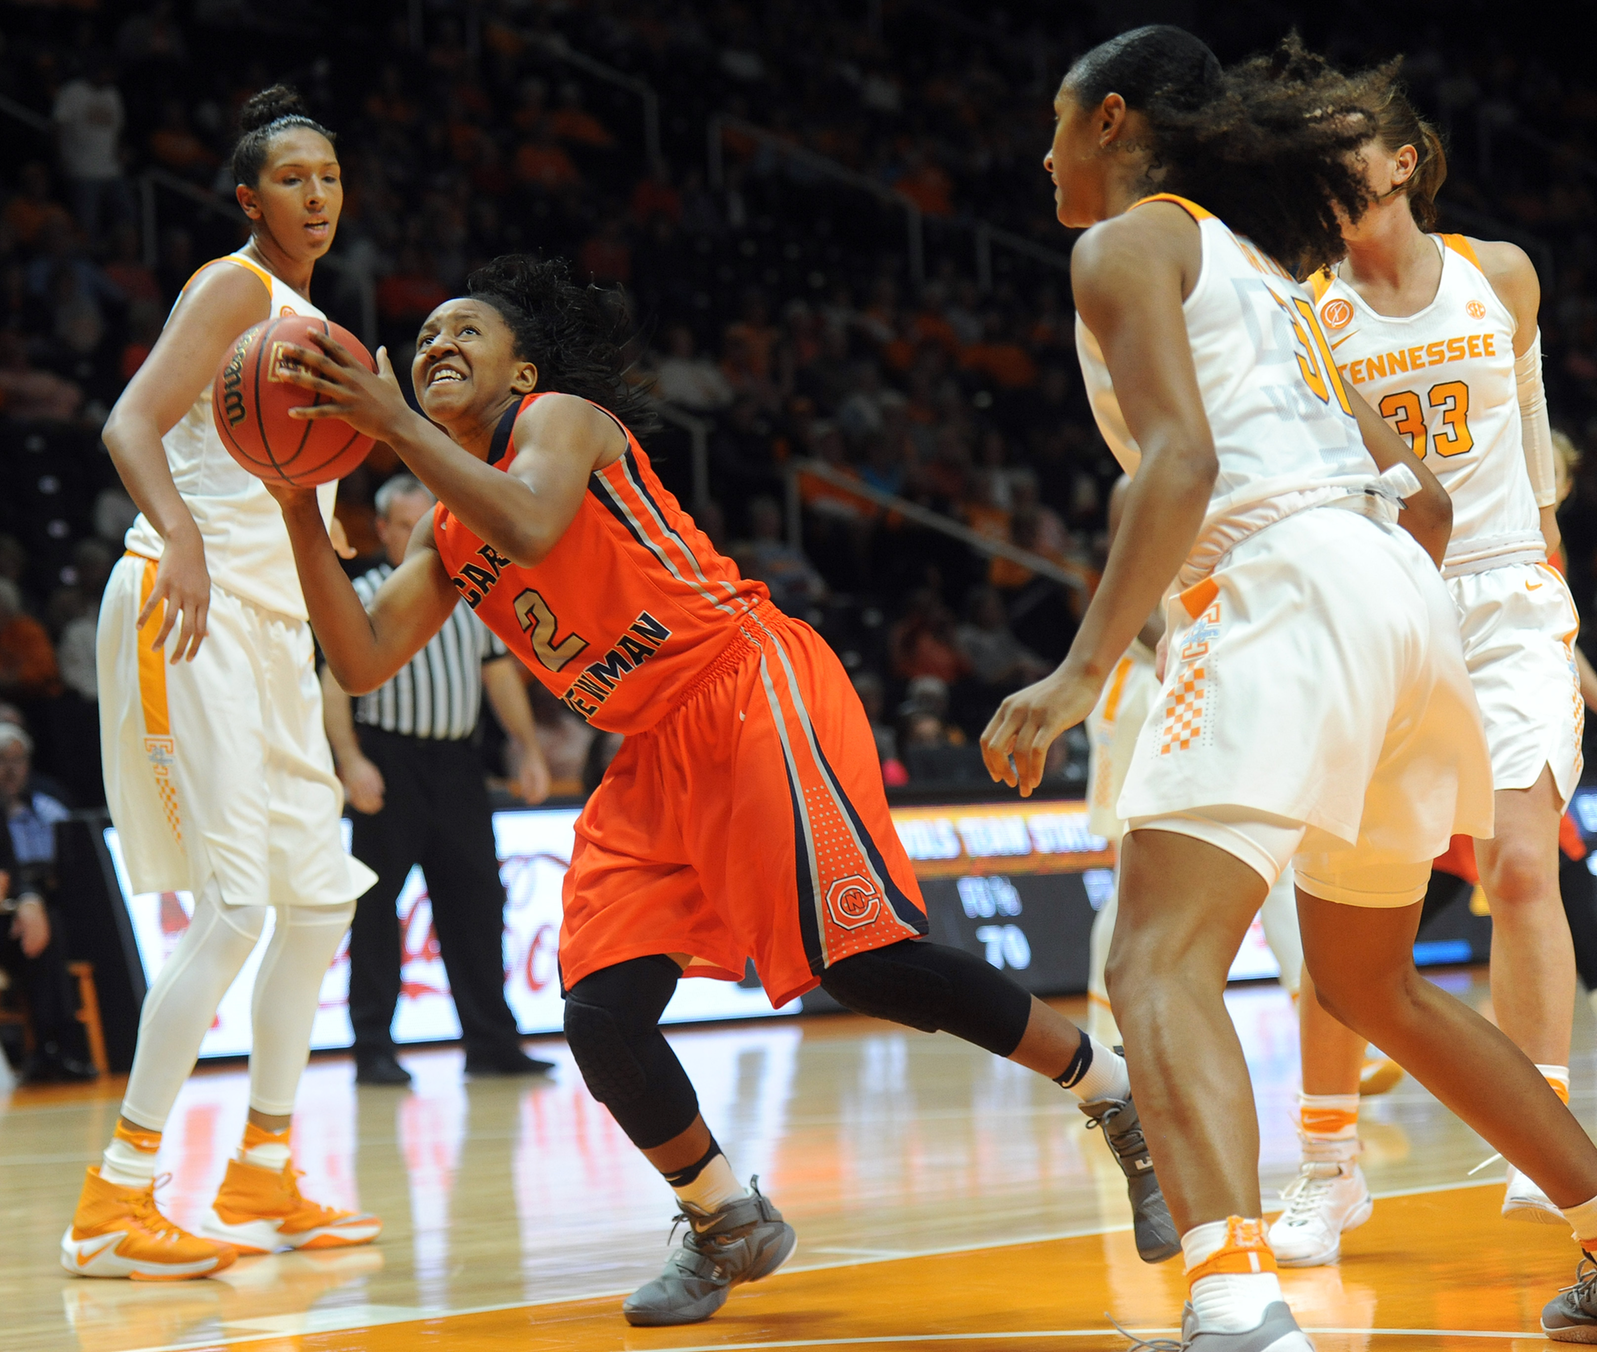 Lady Vols use strong second half to top Lady Eagles 95-56